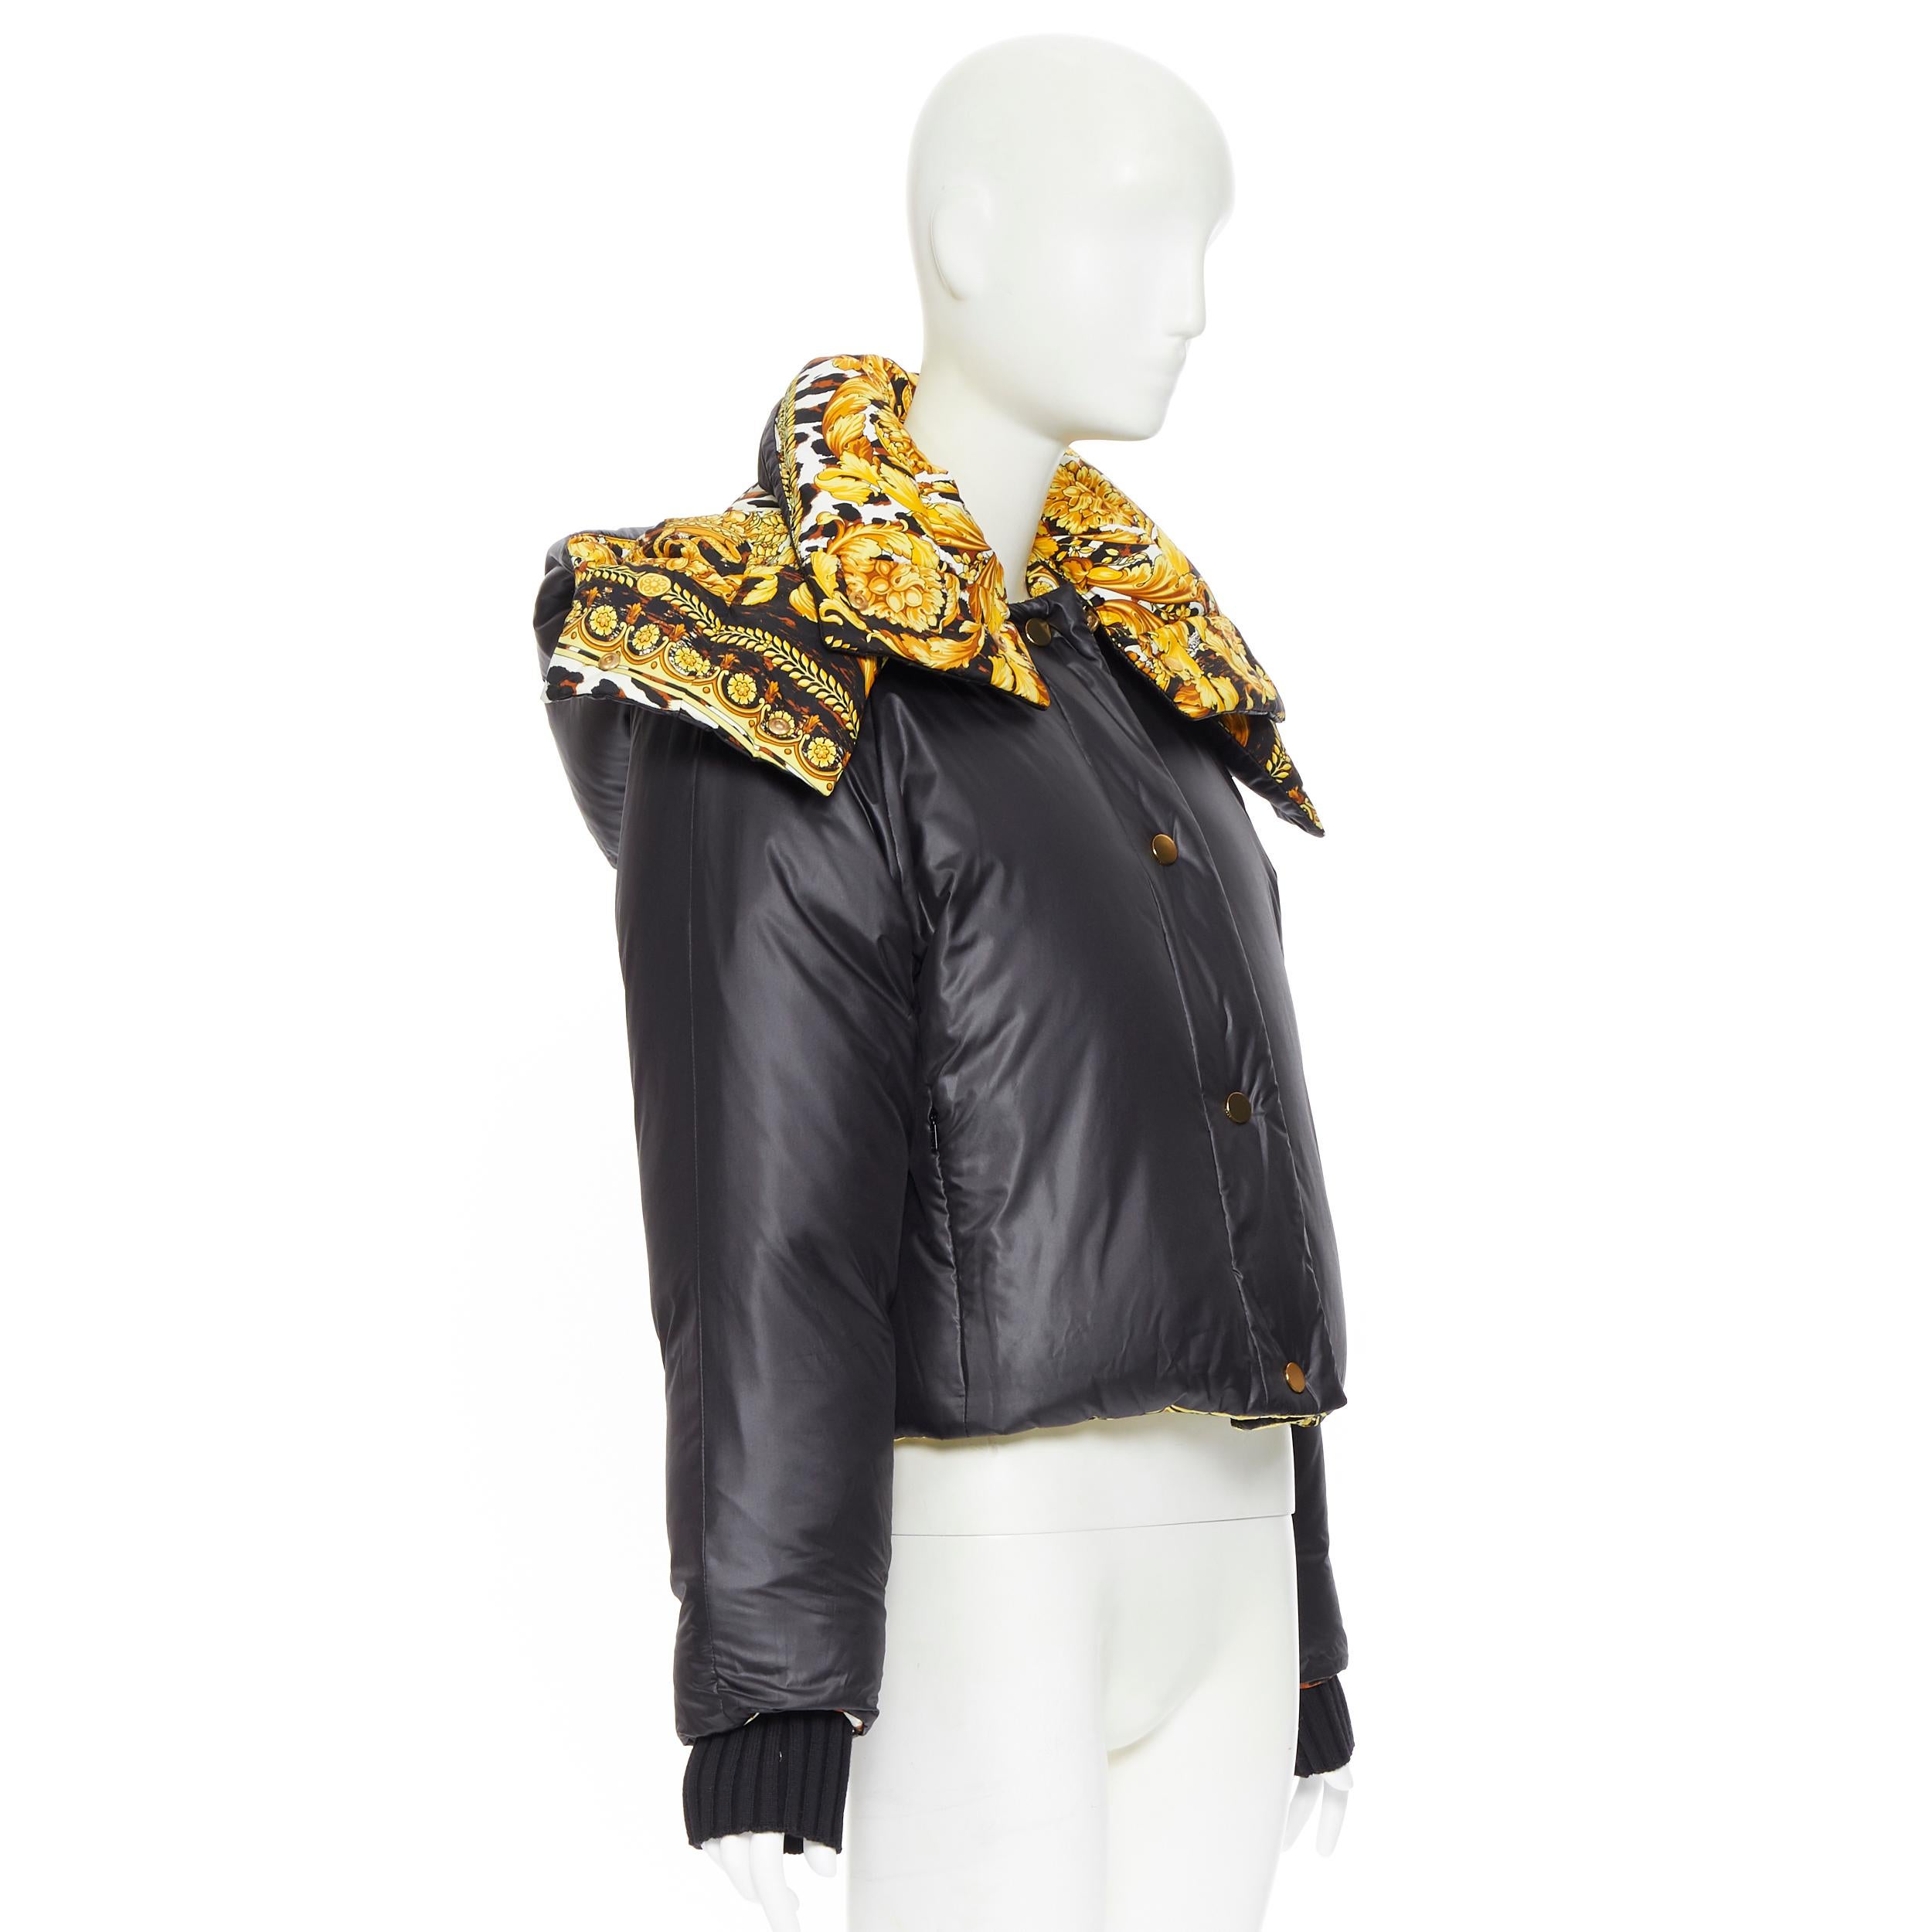 new VERSACE Reversible Wild Baroque leopard gold goose down padded jacket IT40 S
Brand: Versace
Designer: Donatella Versace
Collection: 2019
Model Name / Style: Wild baroque down jacket
Material: Nylon
Color: Gold
Pattern: Animal print
Closure: